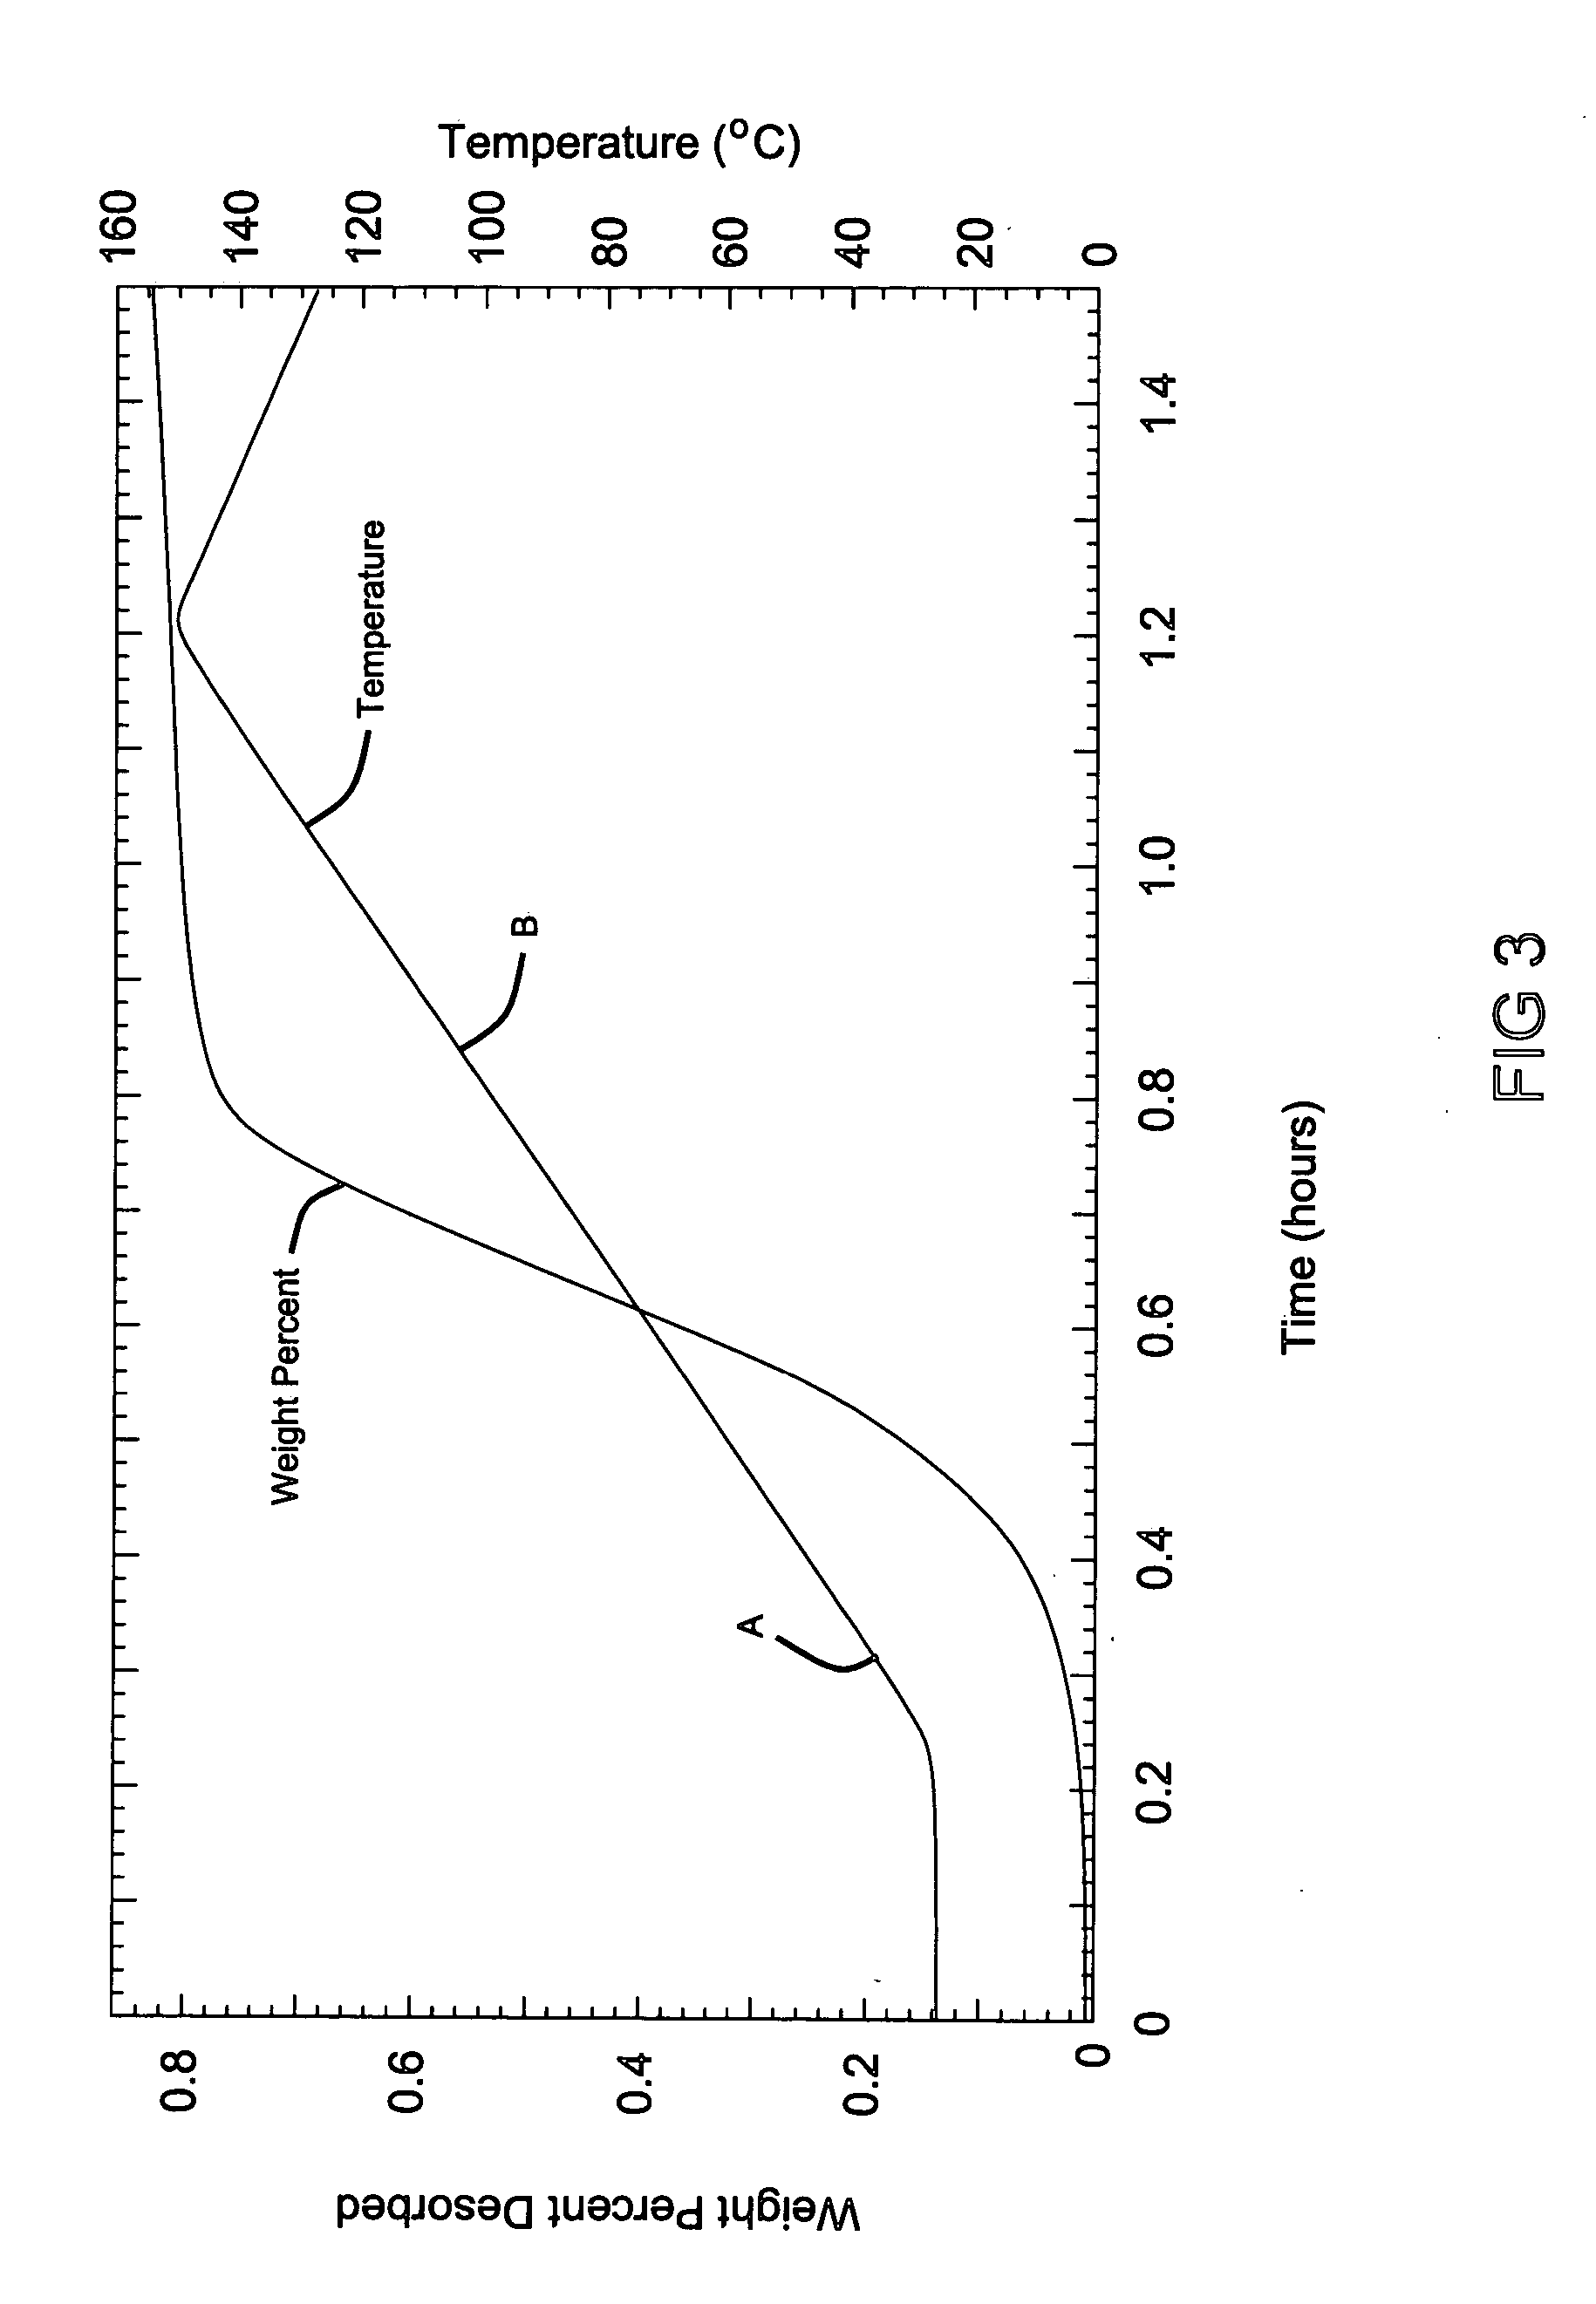 Regeneration of hydrogen storage system materials and methods including hydrides and hydroxides